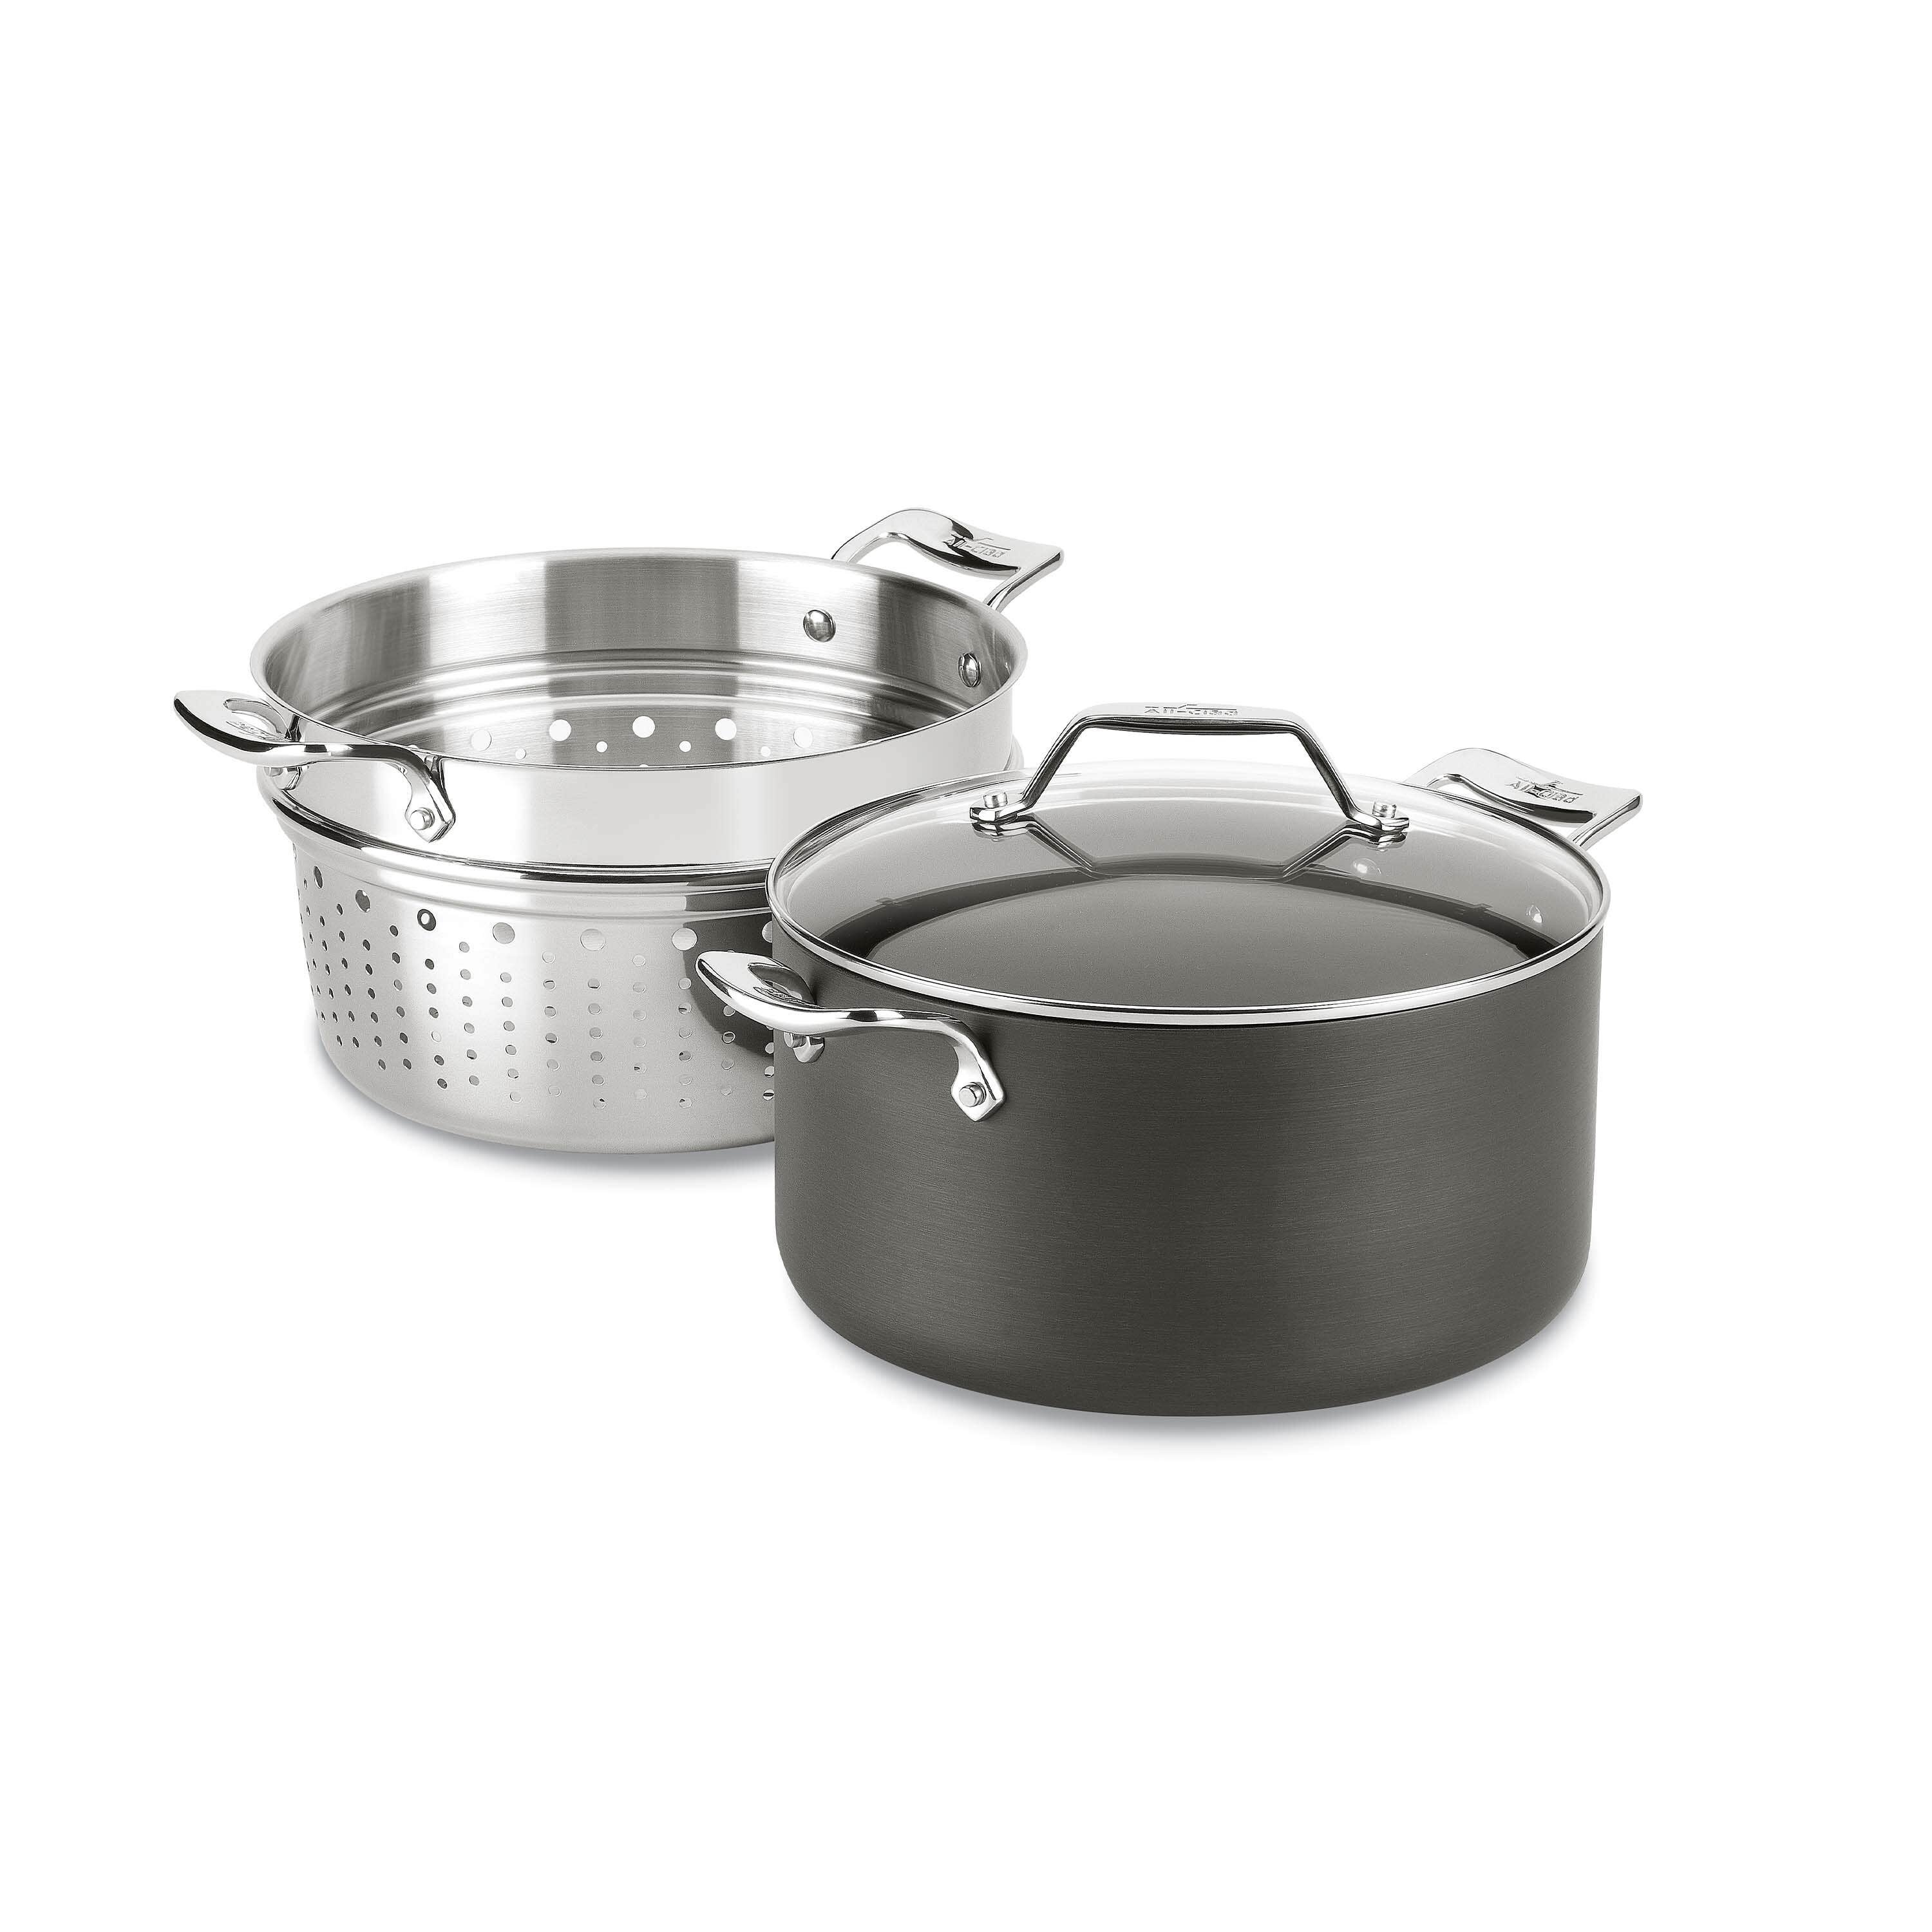 All-Clad 7 Quart Slow Cooker with Aluminum Insert